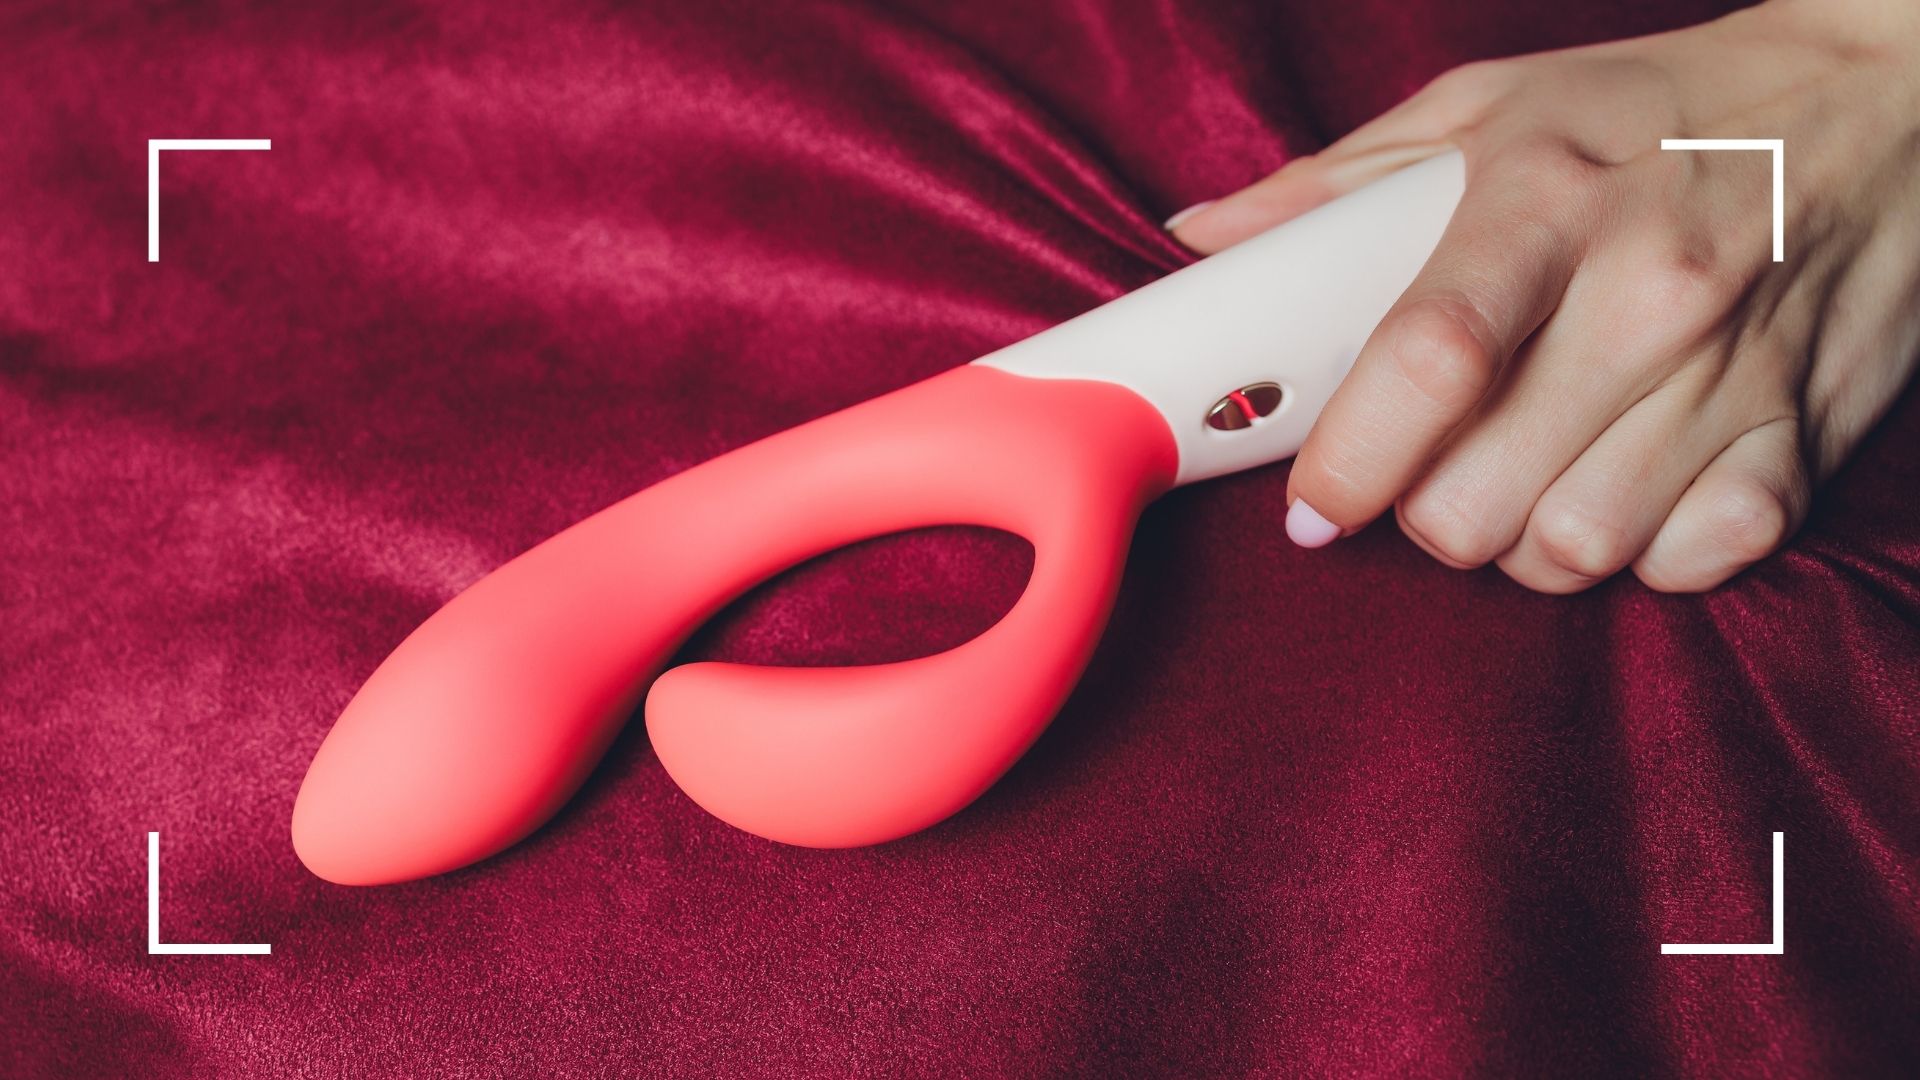 homemade ejculating sex toy